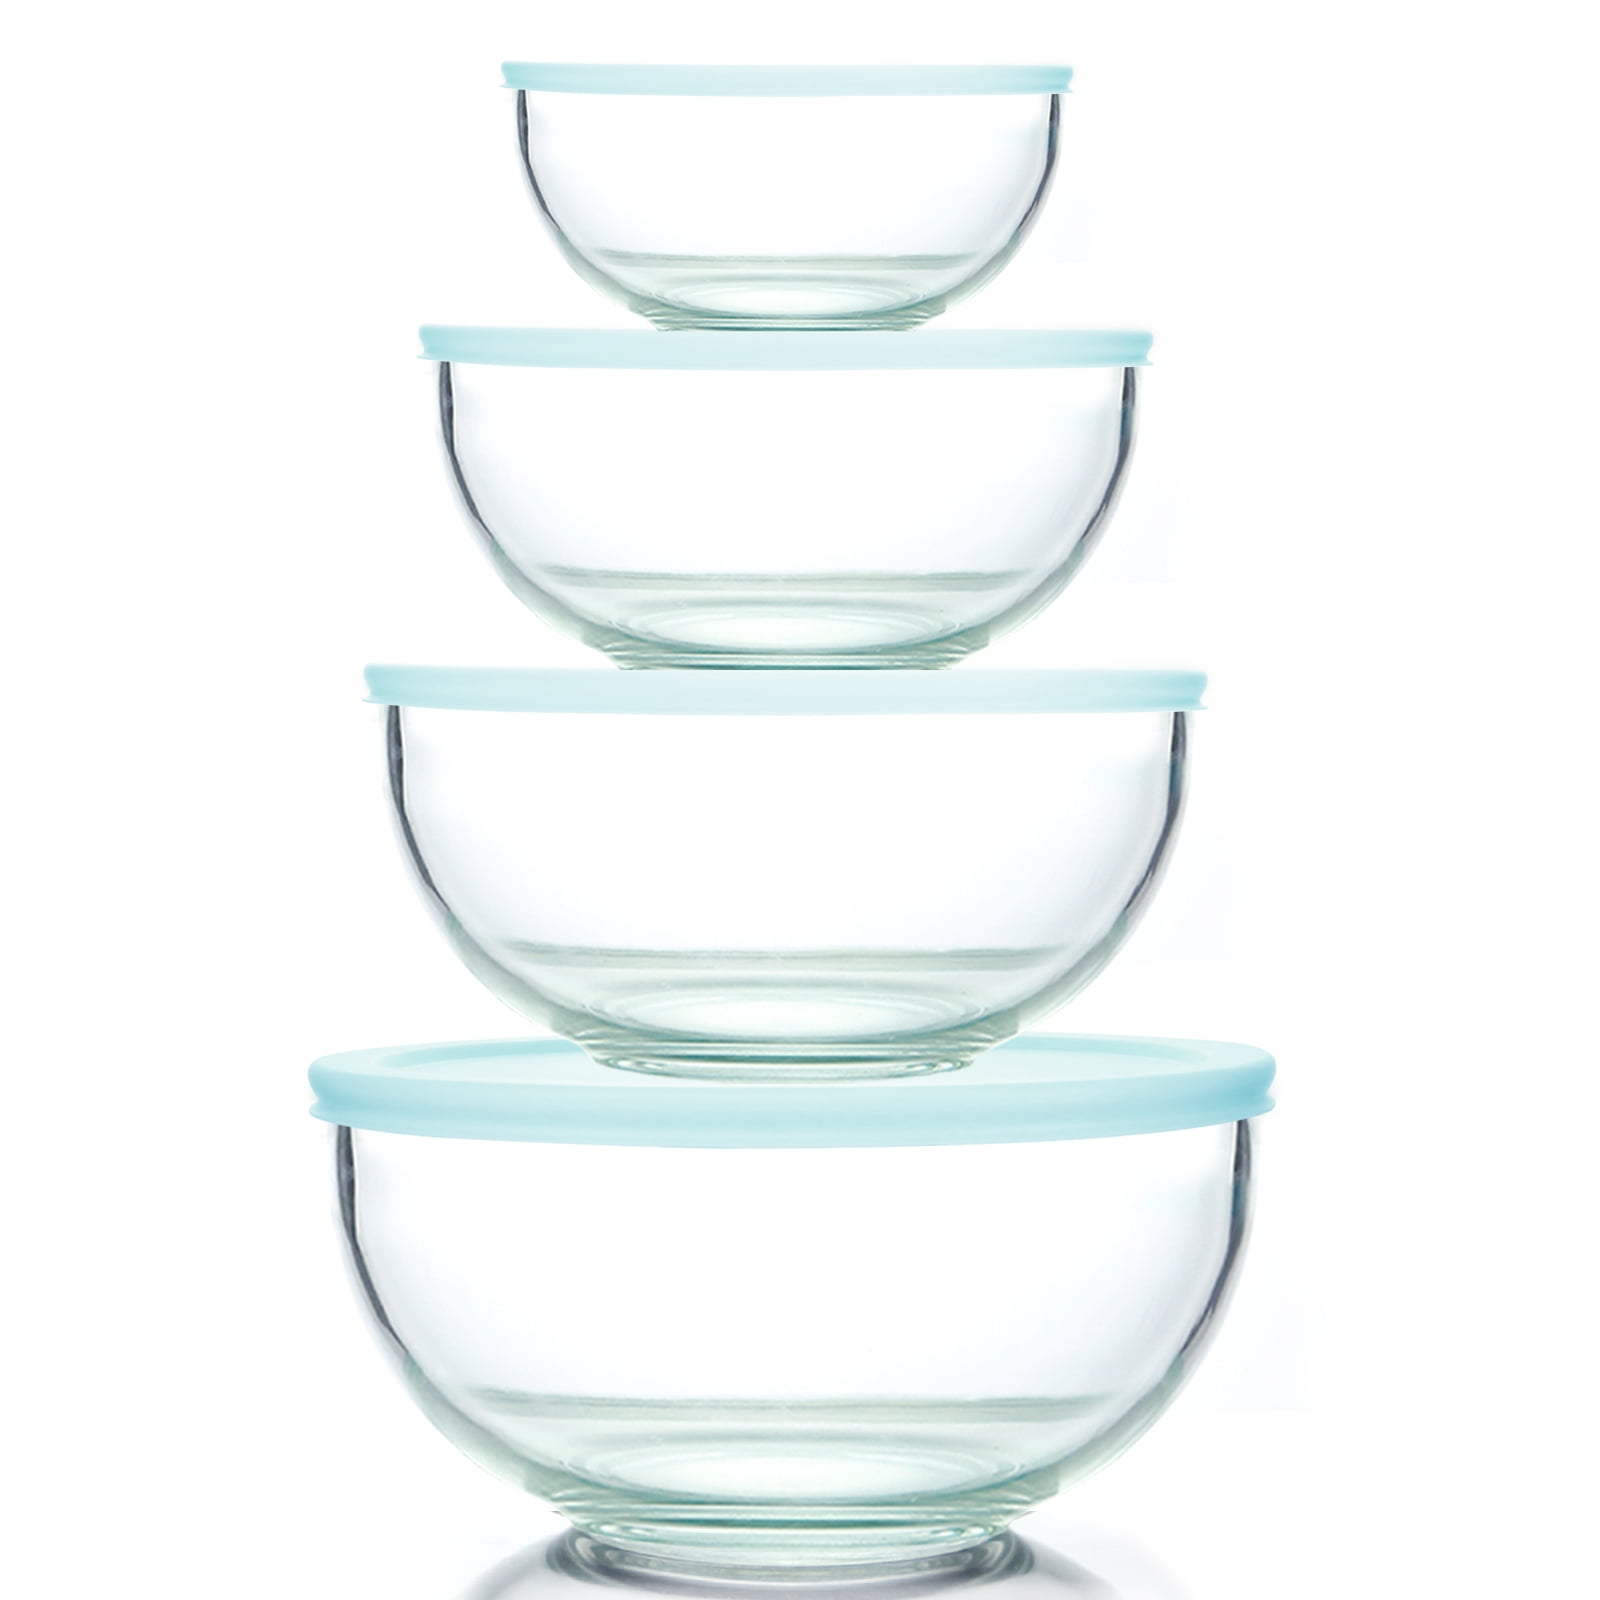 WhiteRhino Glass Bowls with Lids, 3 Packs Clear Mixing Bowls Set for  Salad,Cake, Large Mixing Bowl for Kitchen 